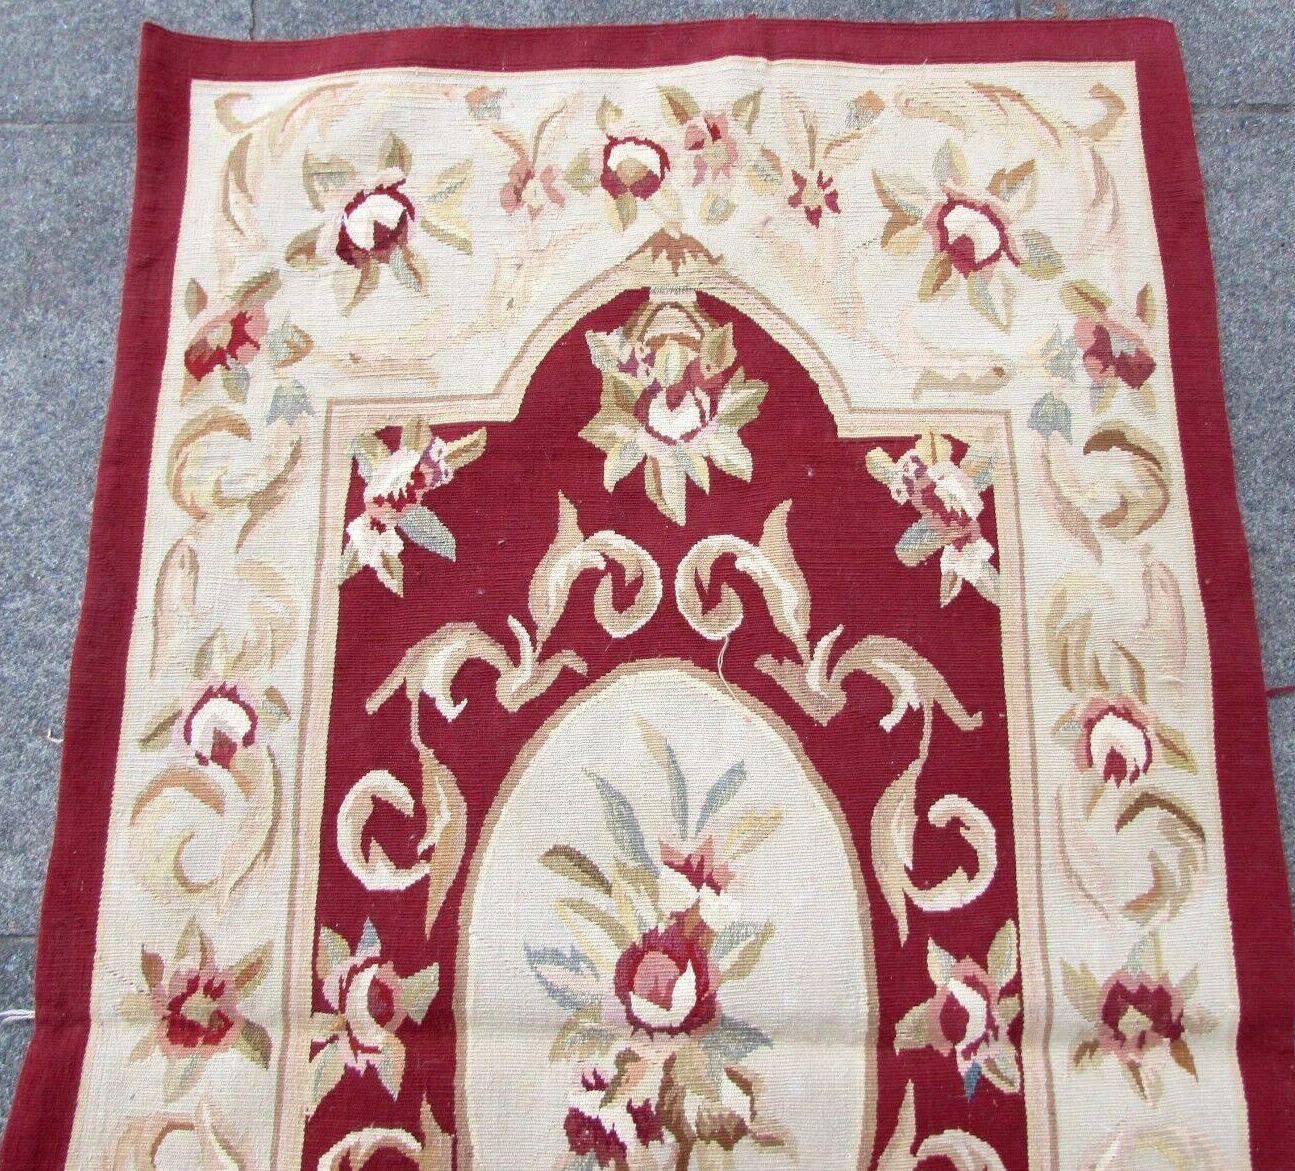 Handmade vintage Classic French Aubusson rug. It is from the end of 20th century in original good condition.

- Condition: Original good,

- circa 1980s,

- Size: 2.8' x 4.10' (81cm x 145cm),

- Material: Wool,

- Country of origin: